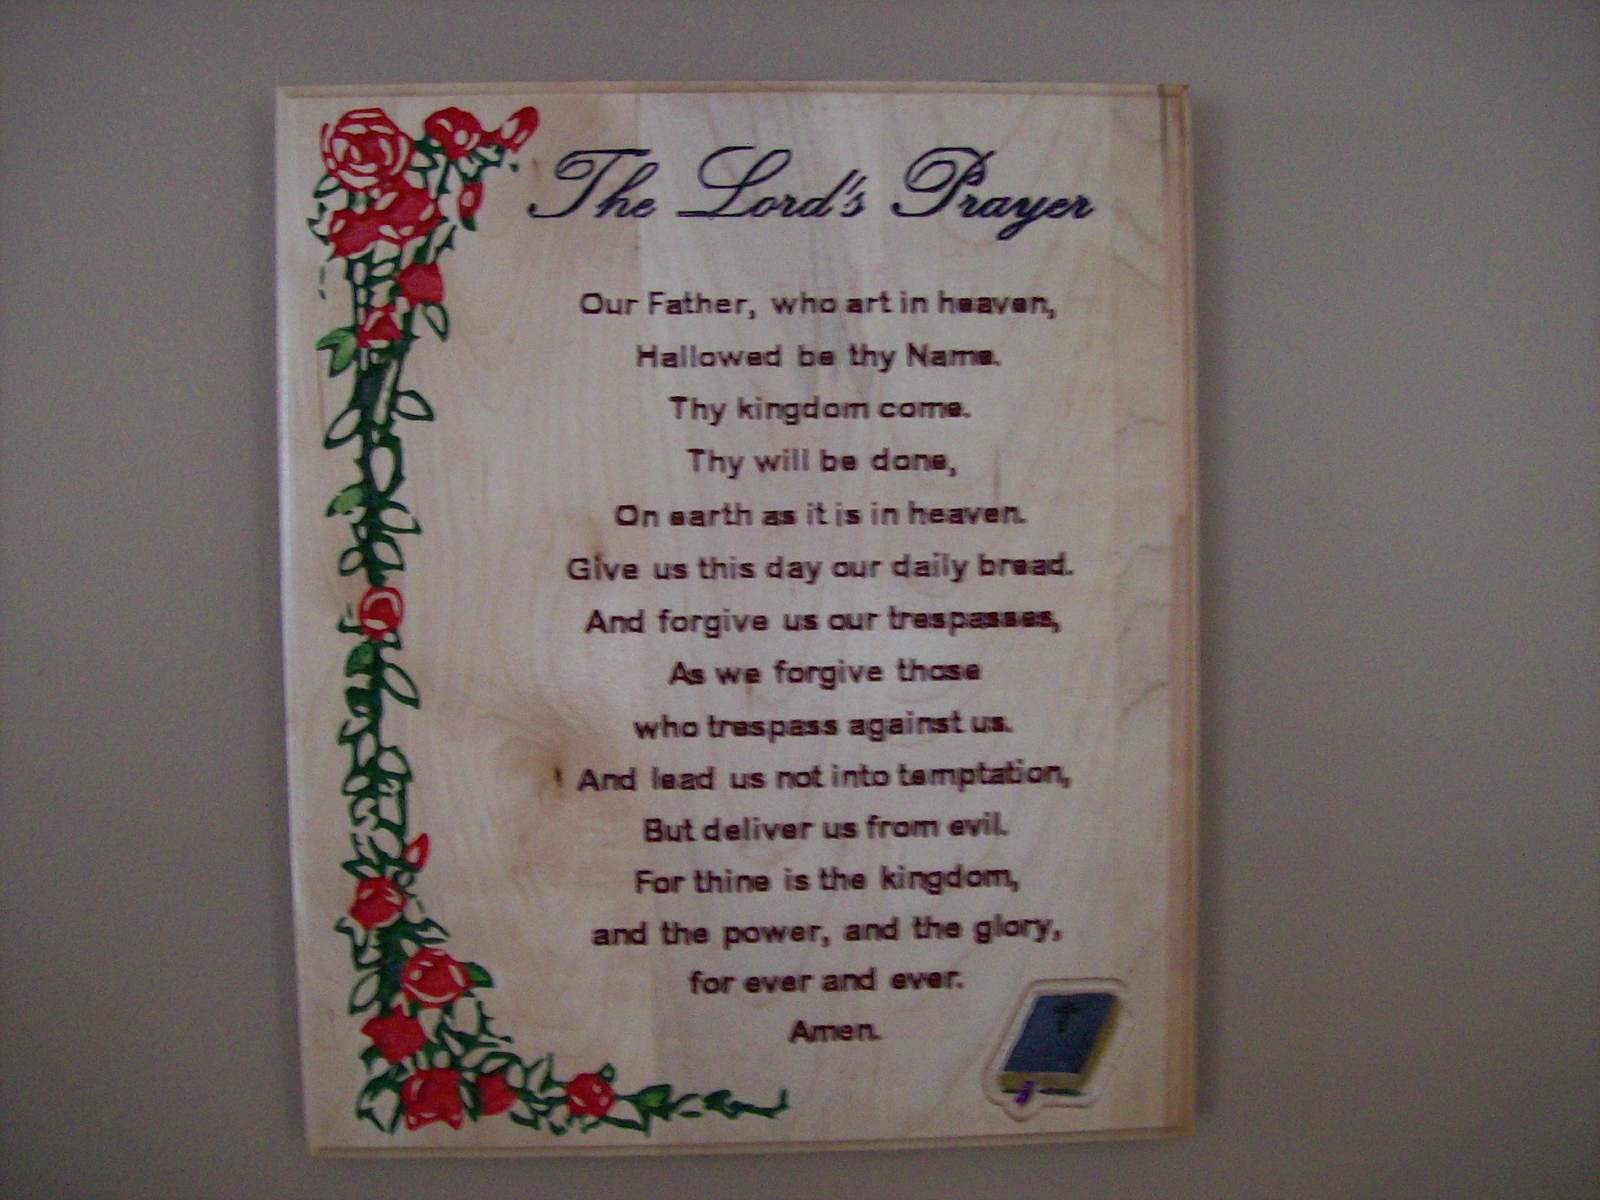 The Lords Prayer Wallpaper images